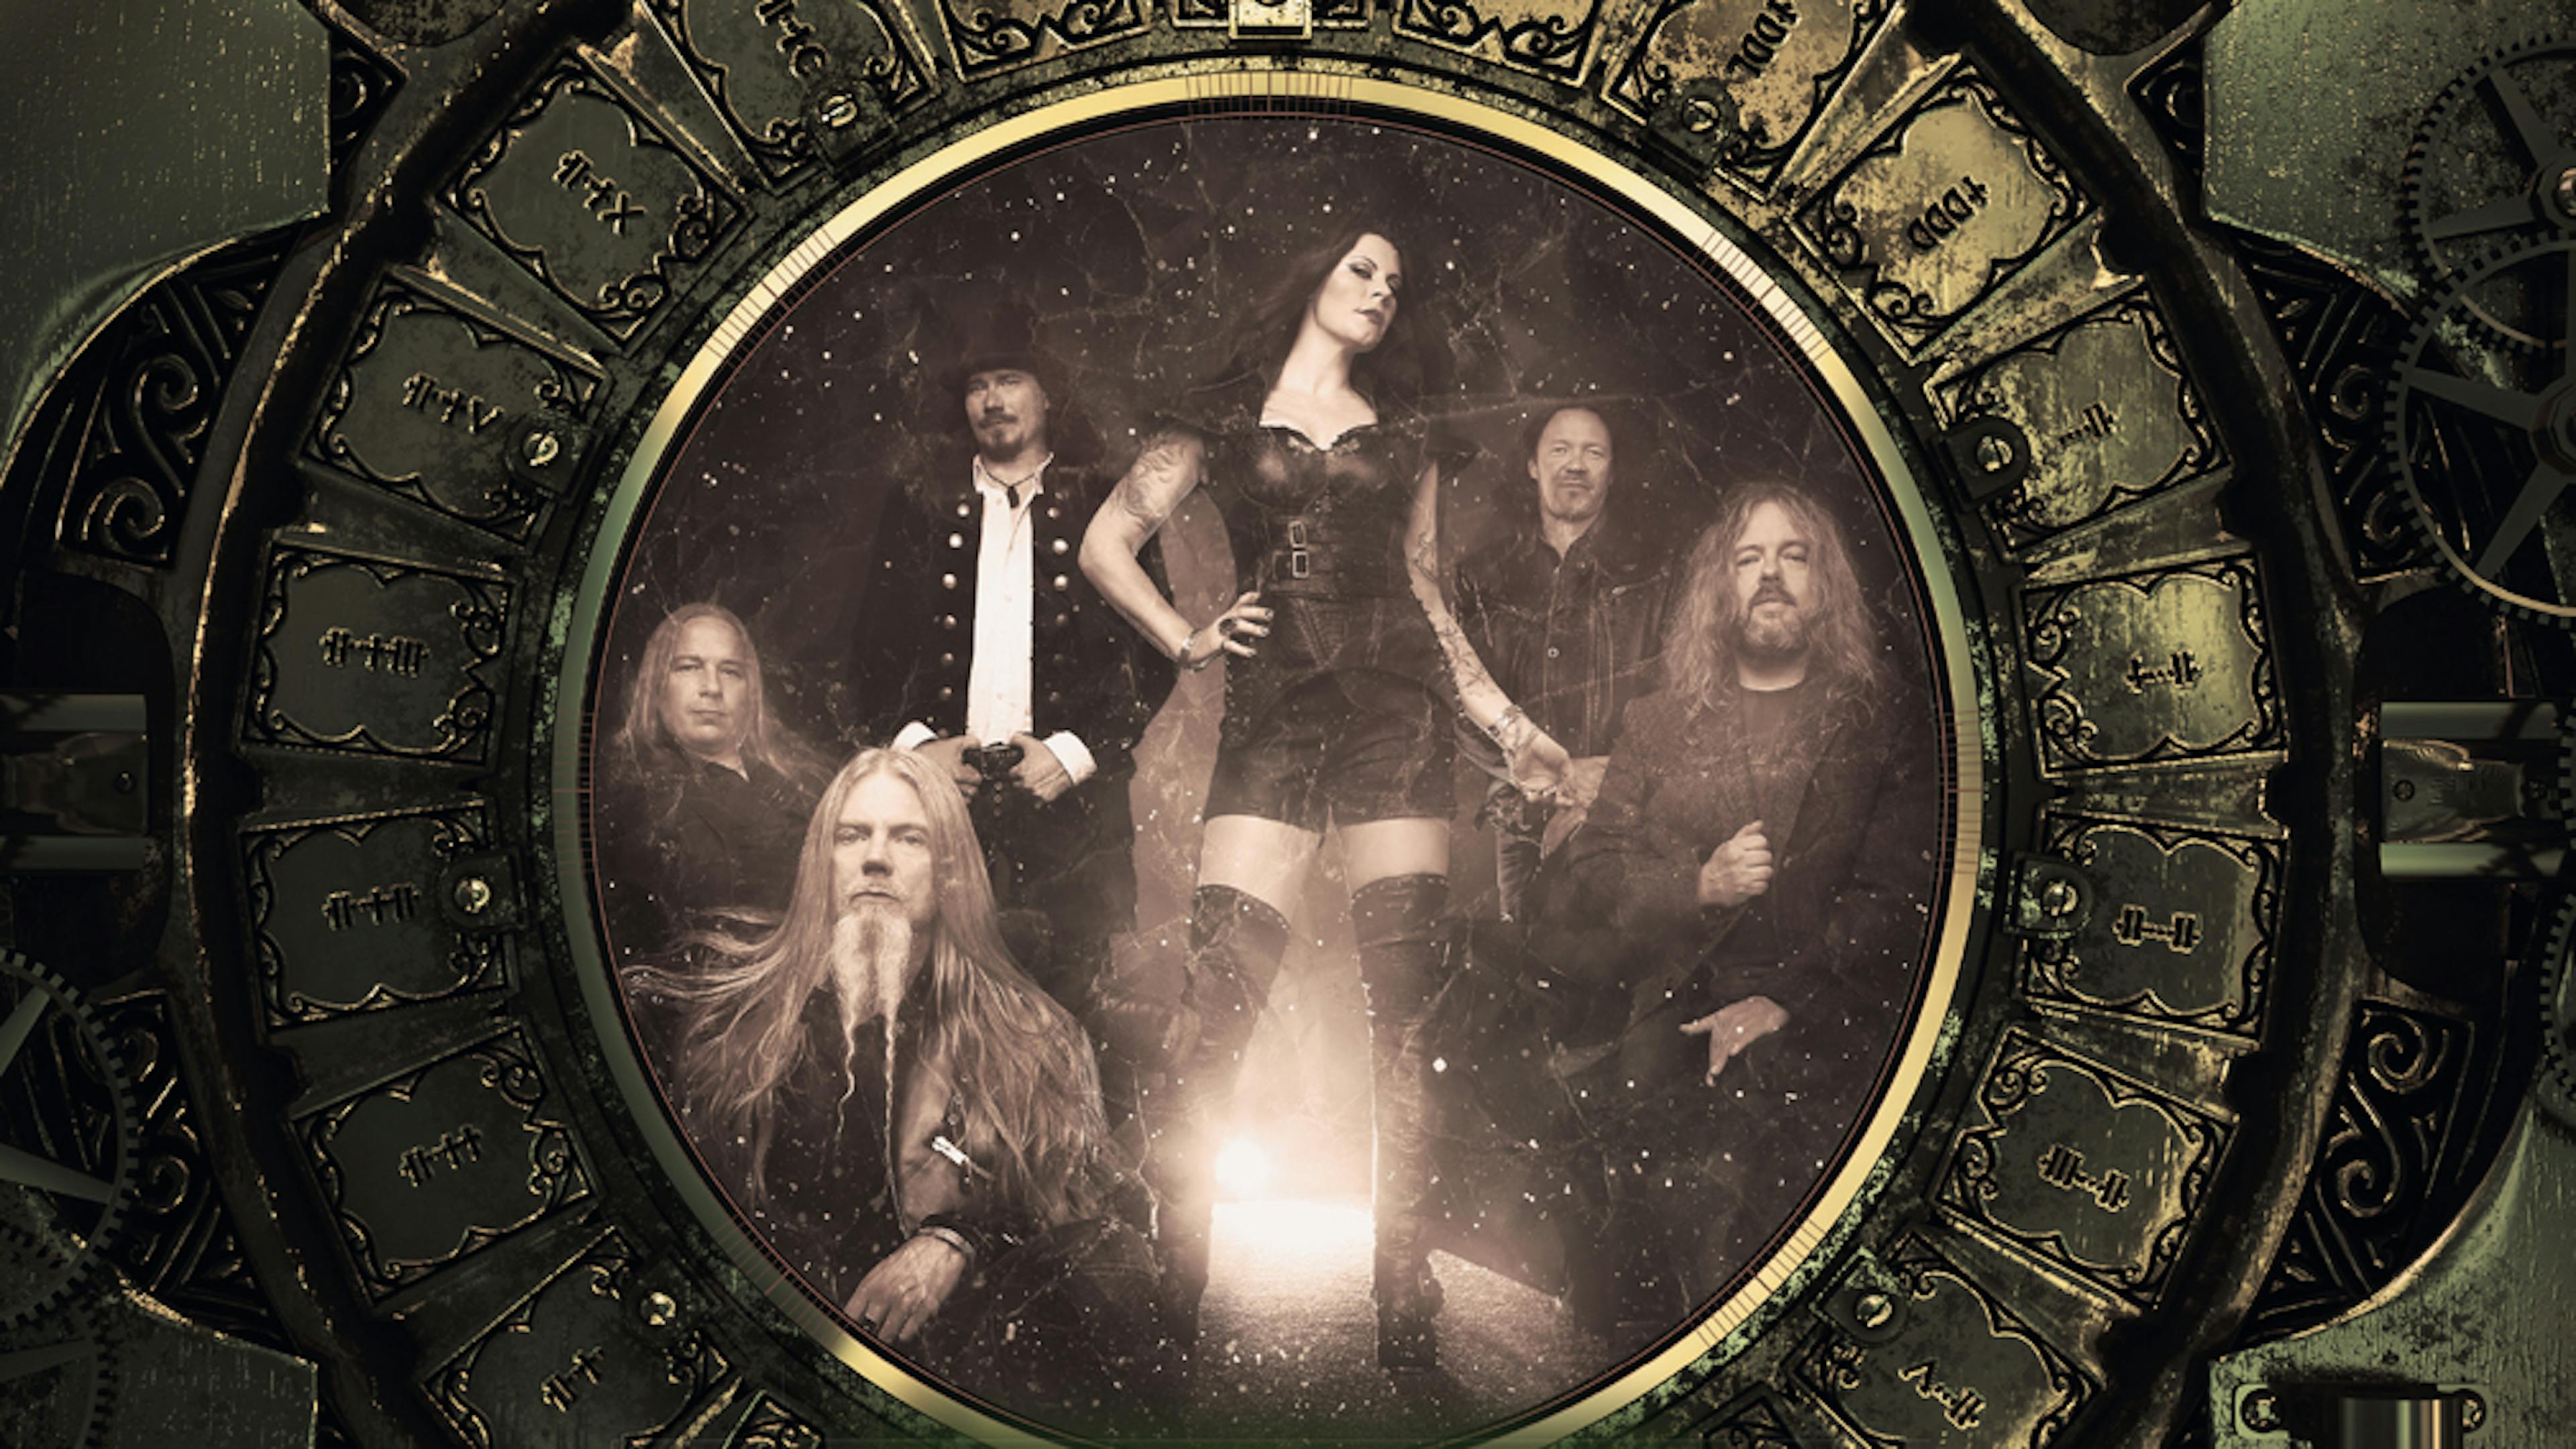 Nightwish Singer Gets An Actual Beetle Named After Her